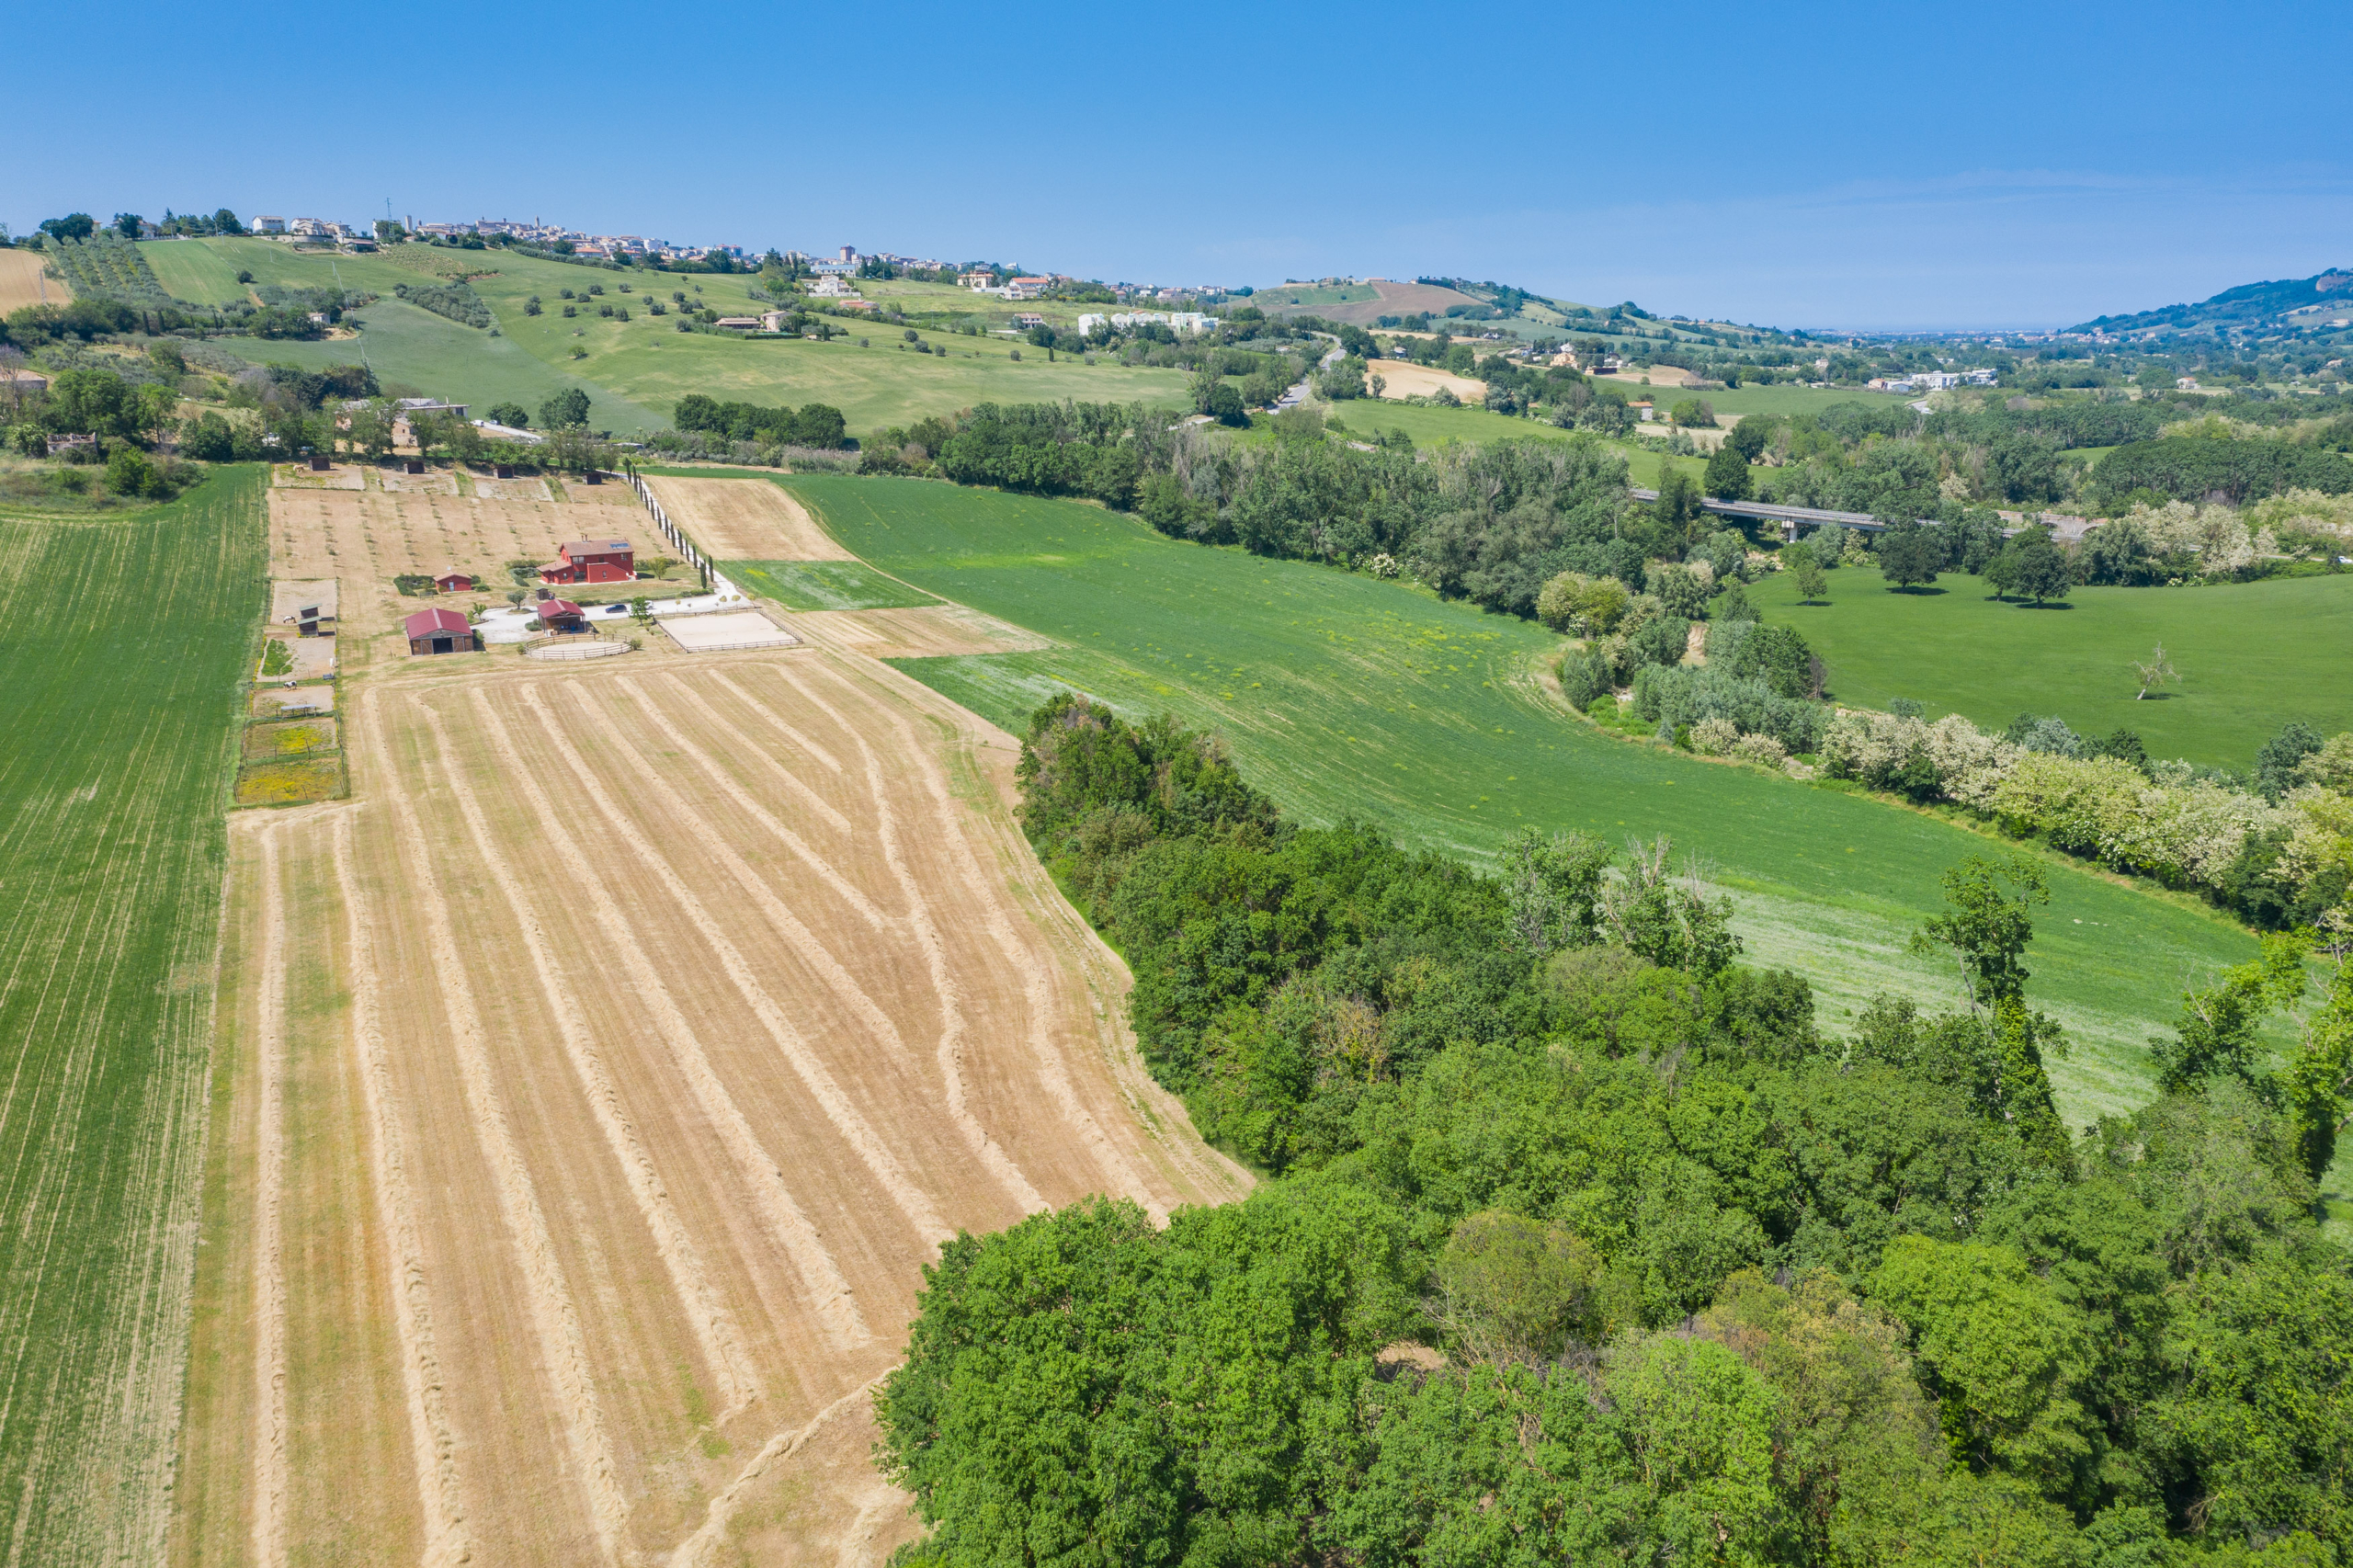 Country house with stables in Le Marche